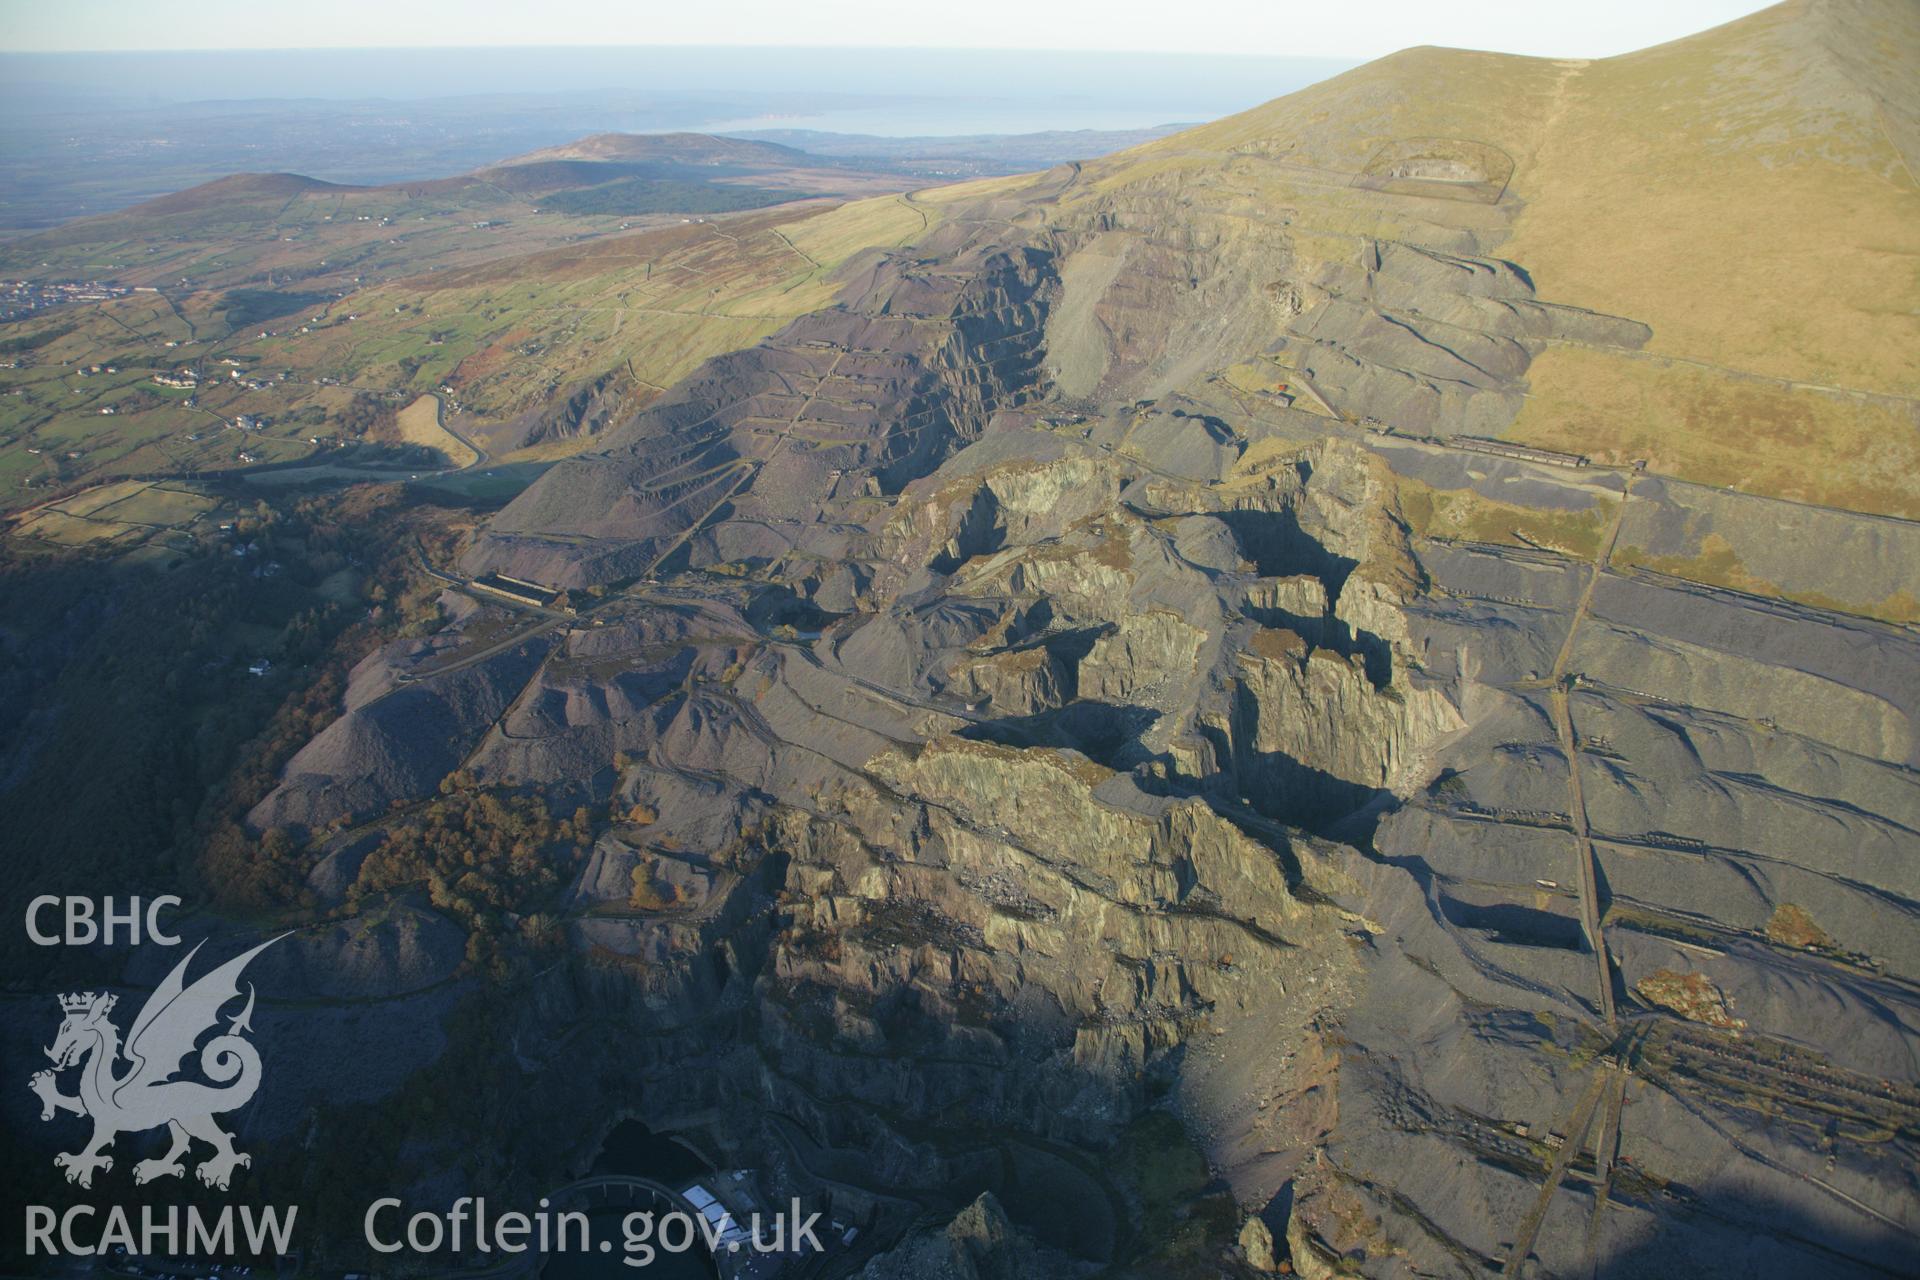 RCAHMW colour oblique aerial photograph of Dinorwic Slate Quarry. A winter landscape view from the south showing an incline. Taken on 21 November 2005 by Toby Driver